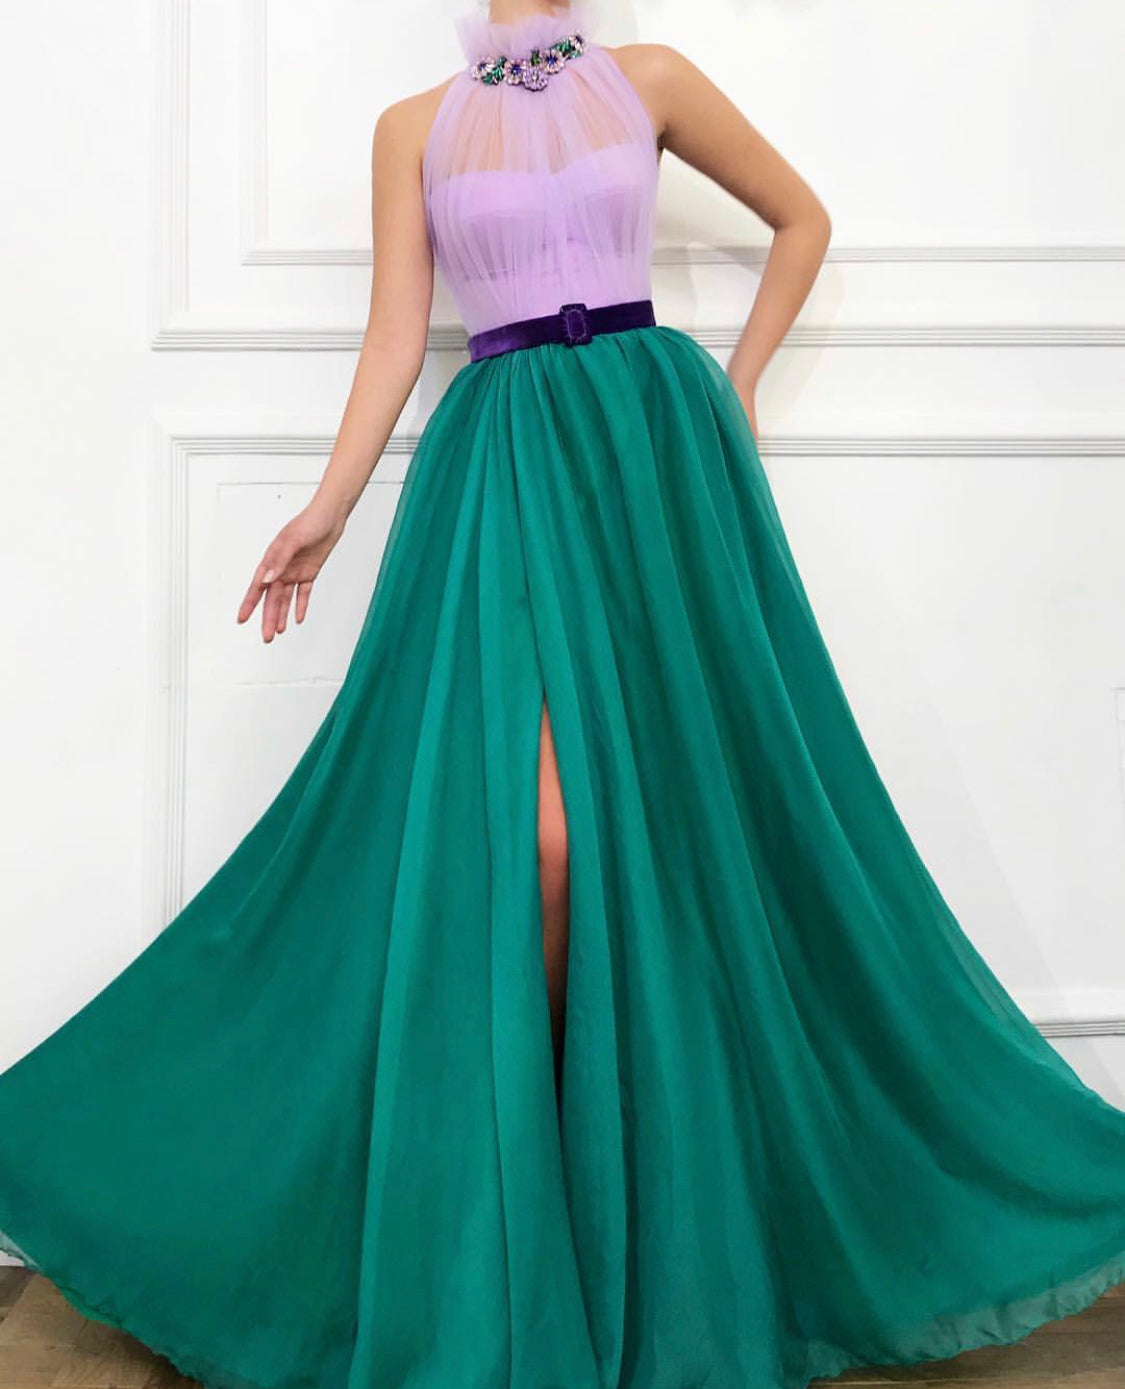 Purple and green A-Line dress with belt, embroidery and no sleeves